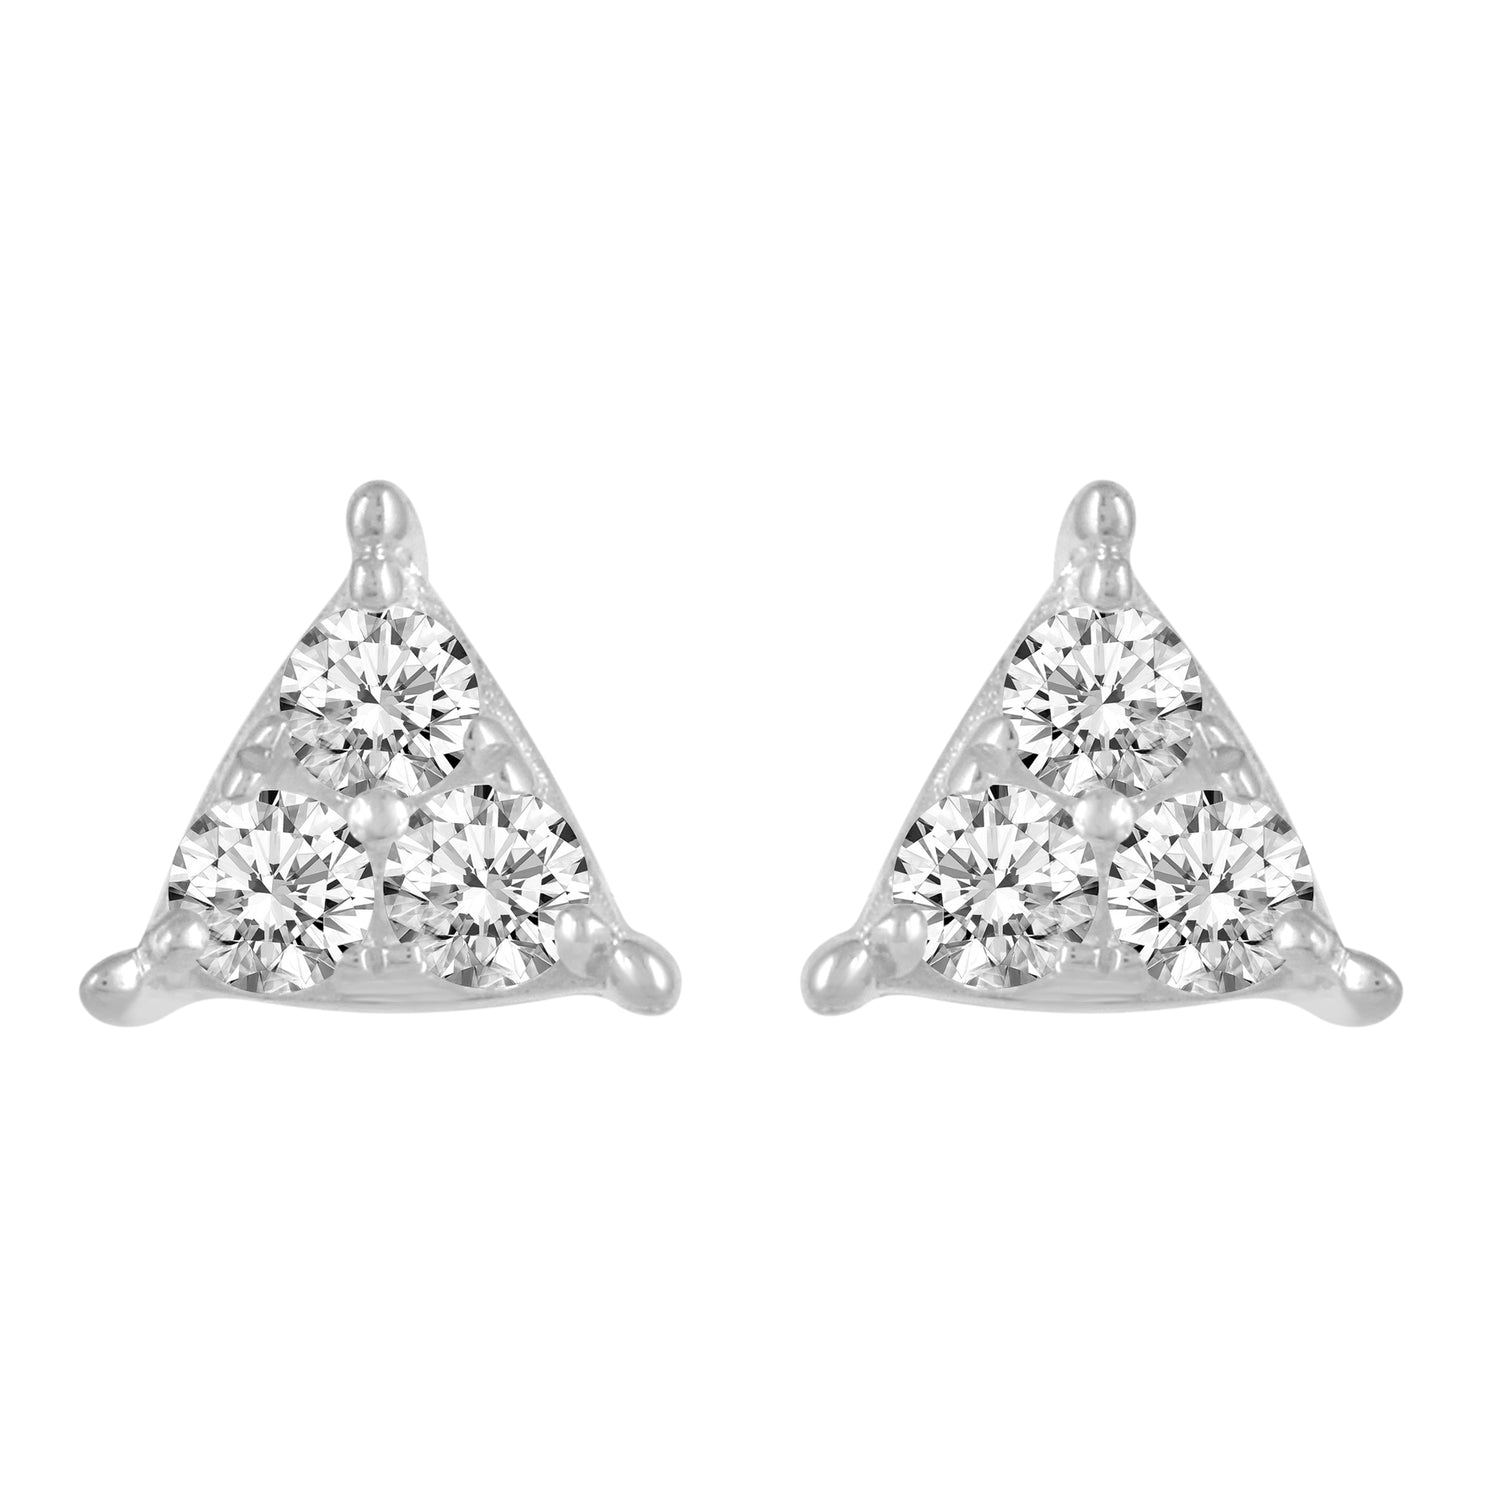 Triangle Cluster Stud Earrings with 1/4 Ctw Natural Diamonds set in 925 Sterling Silver